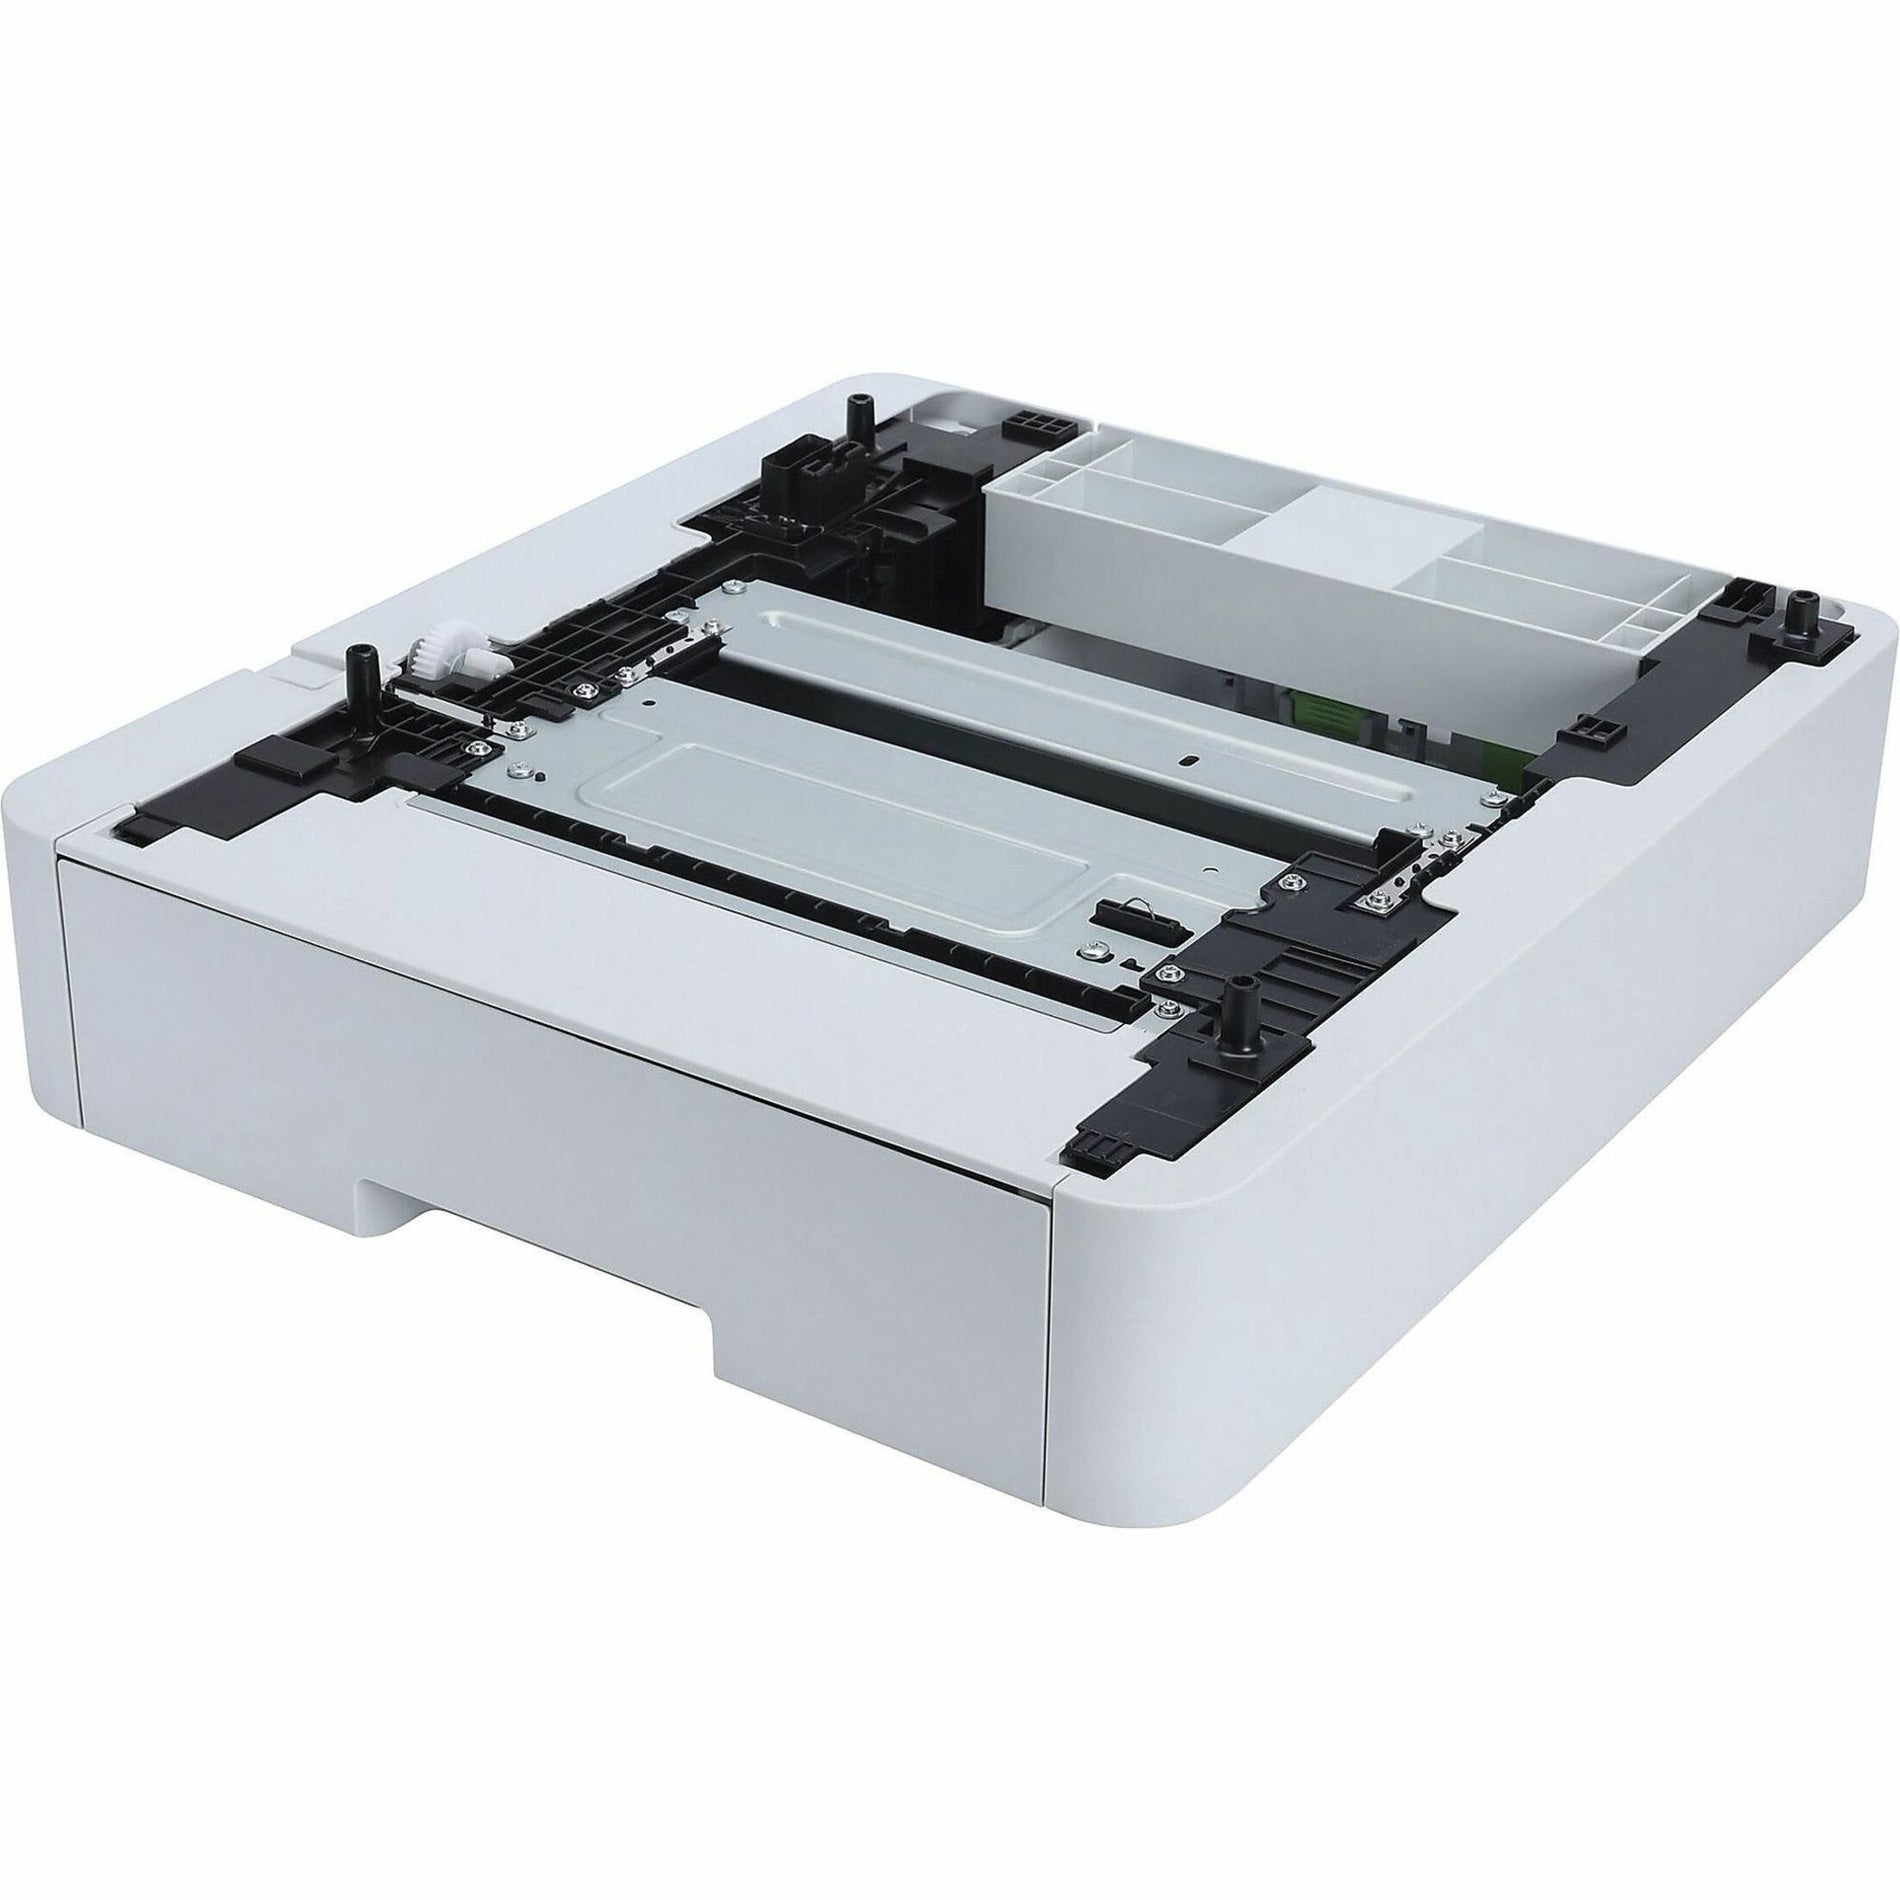 Brother LT-310CL Optional Lower Paper Tray (LT310CL) - Increase Paper Capacity for Brother Printers